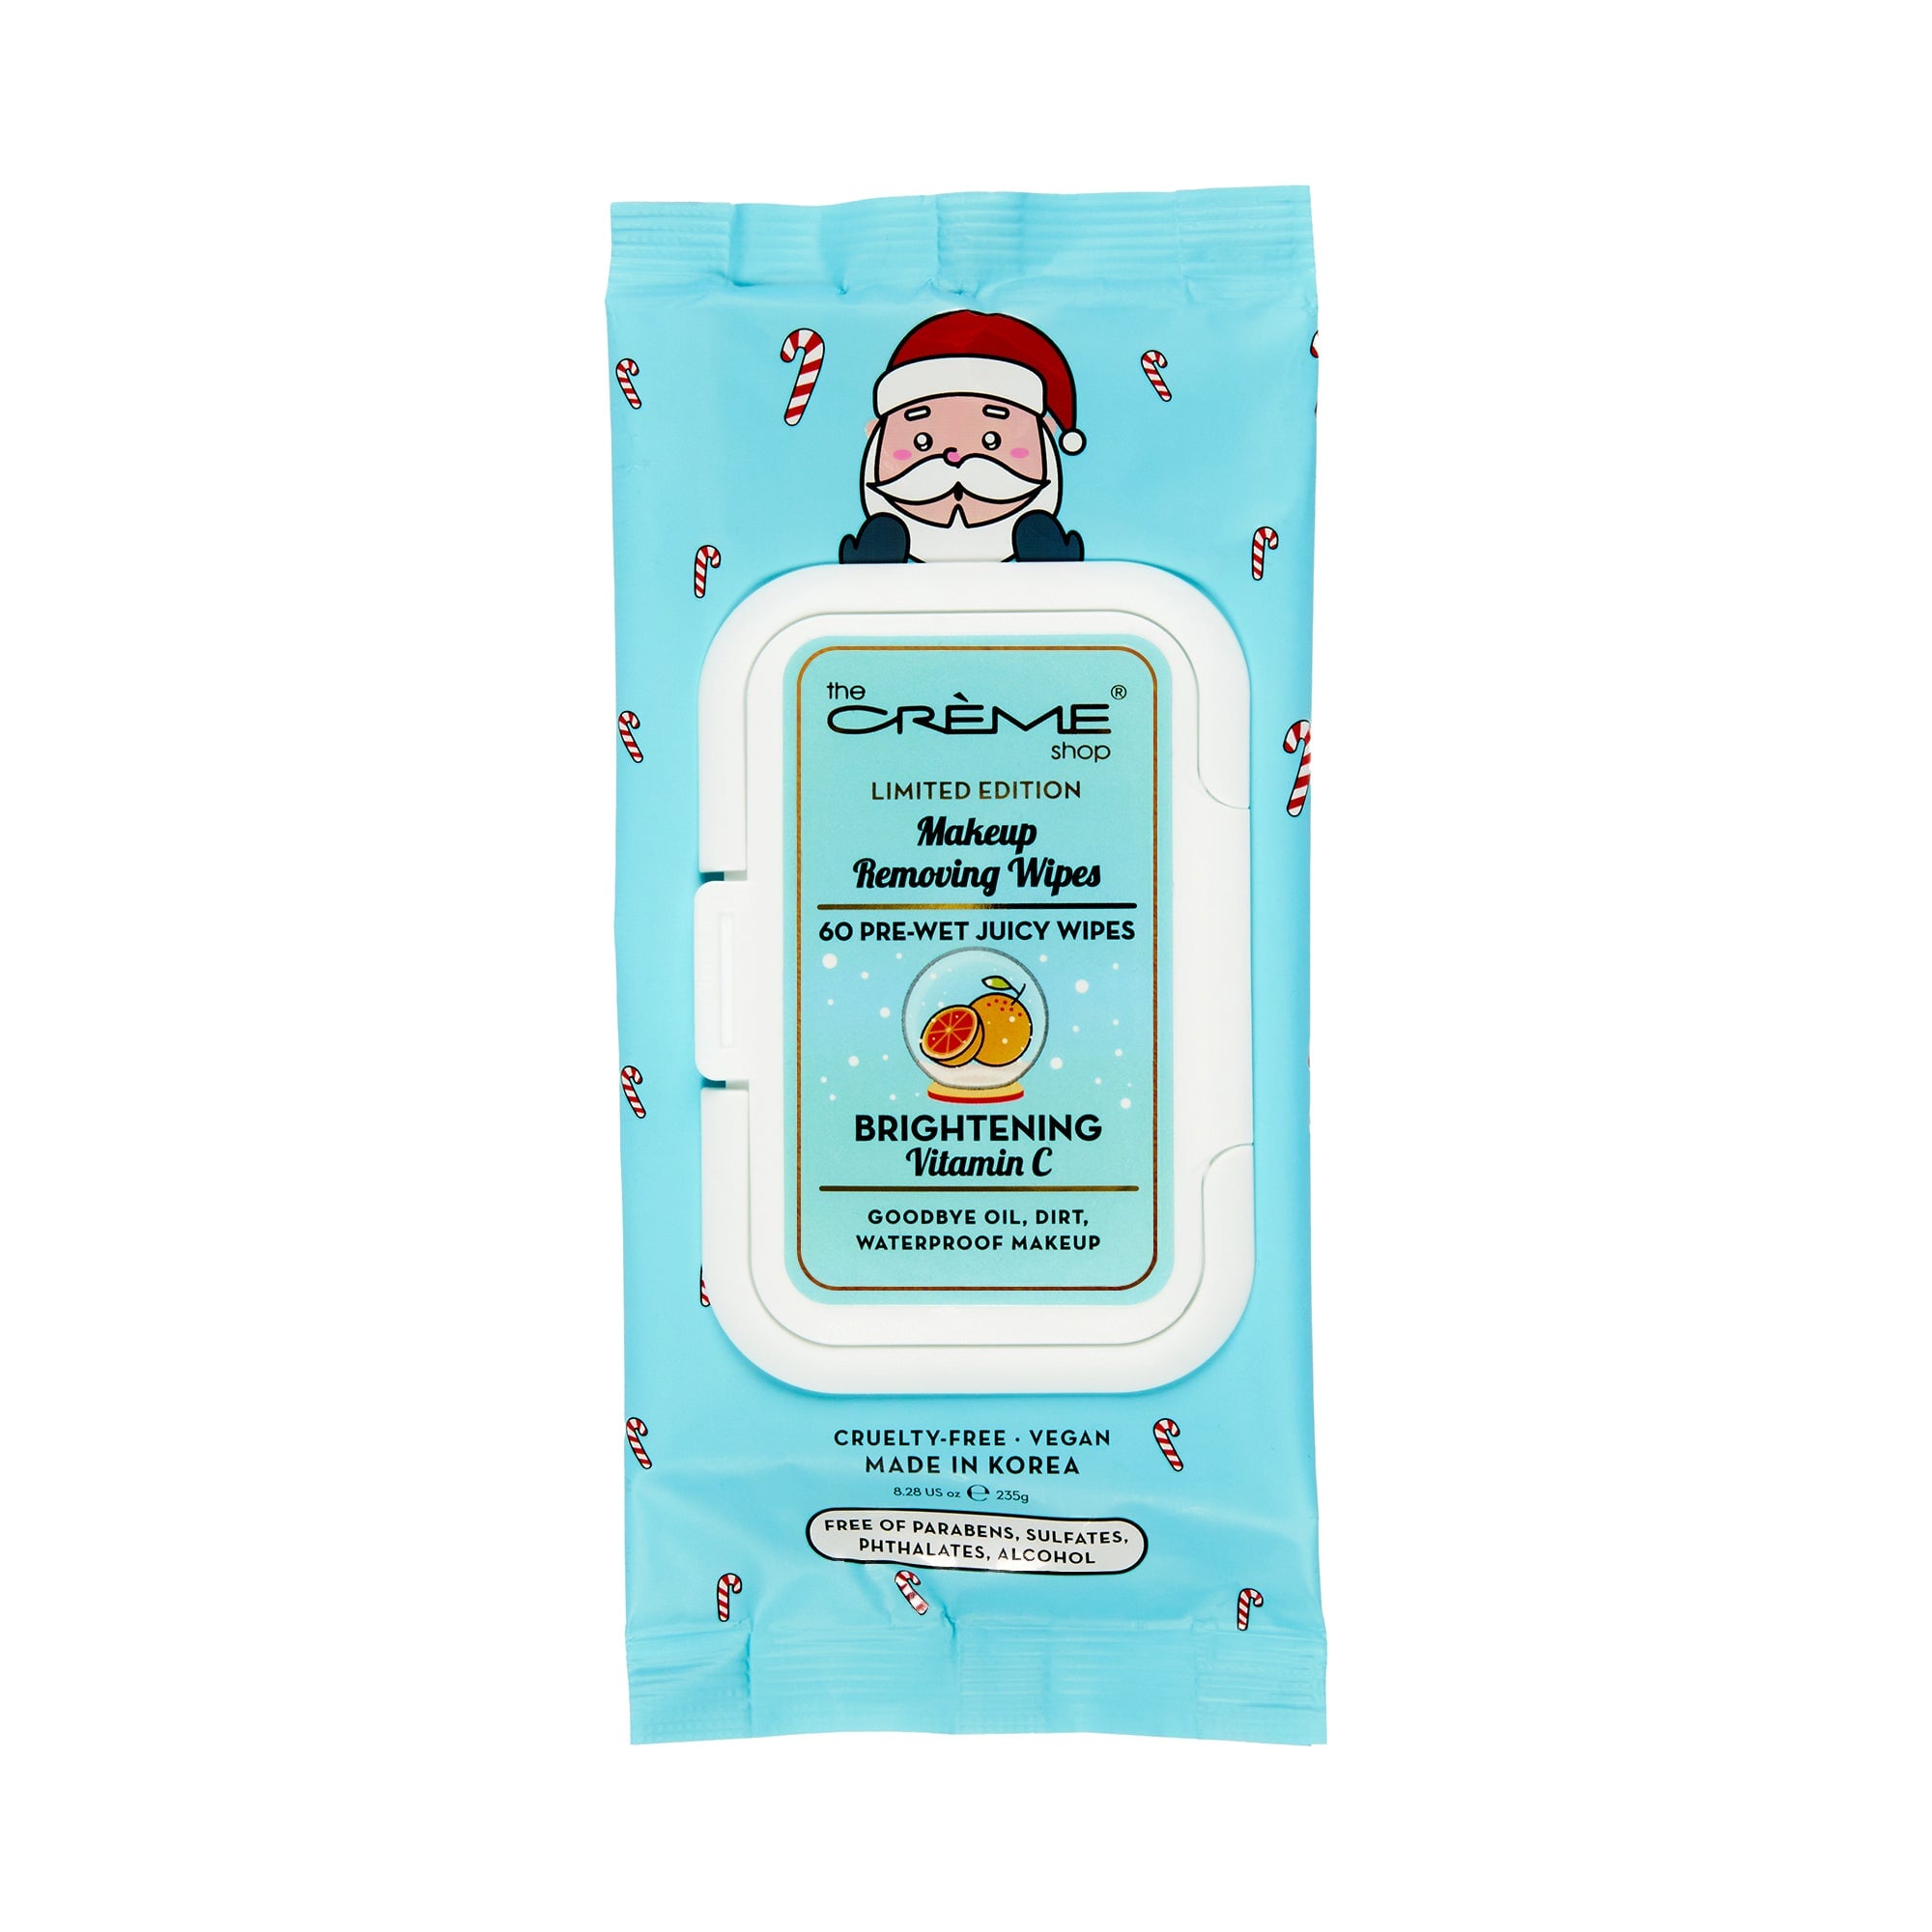 Holiday Santa Makeup Removing Wipes – Brightening Vitamin C Towelettes The Crème Shop 